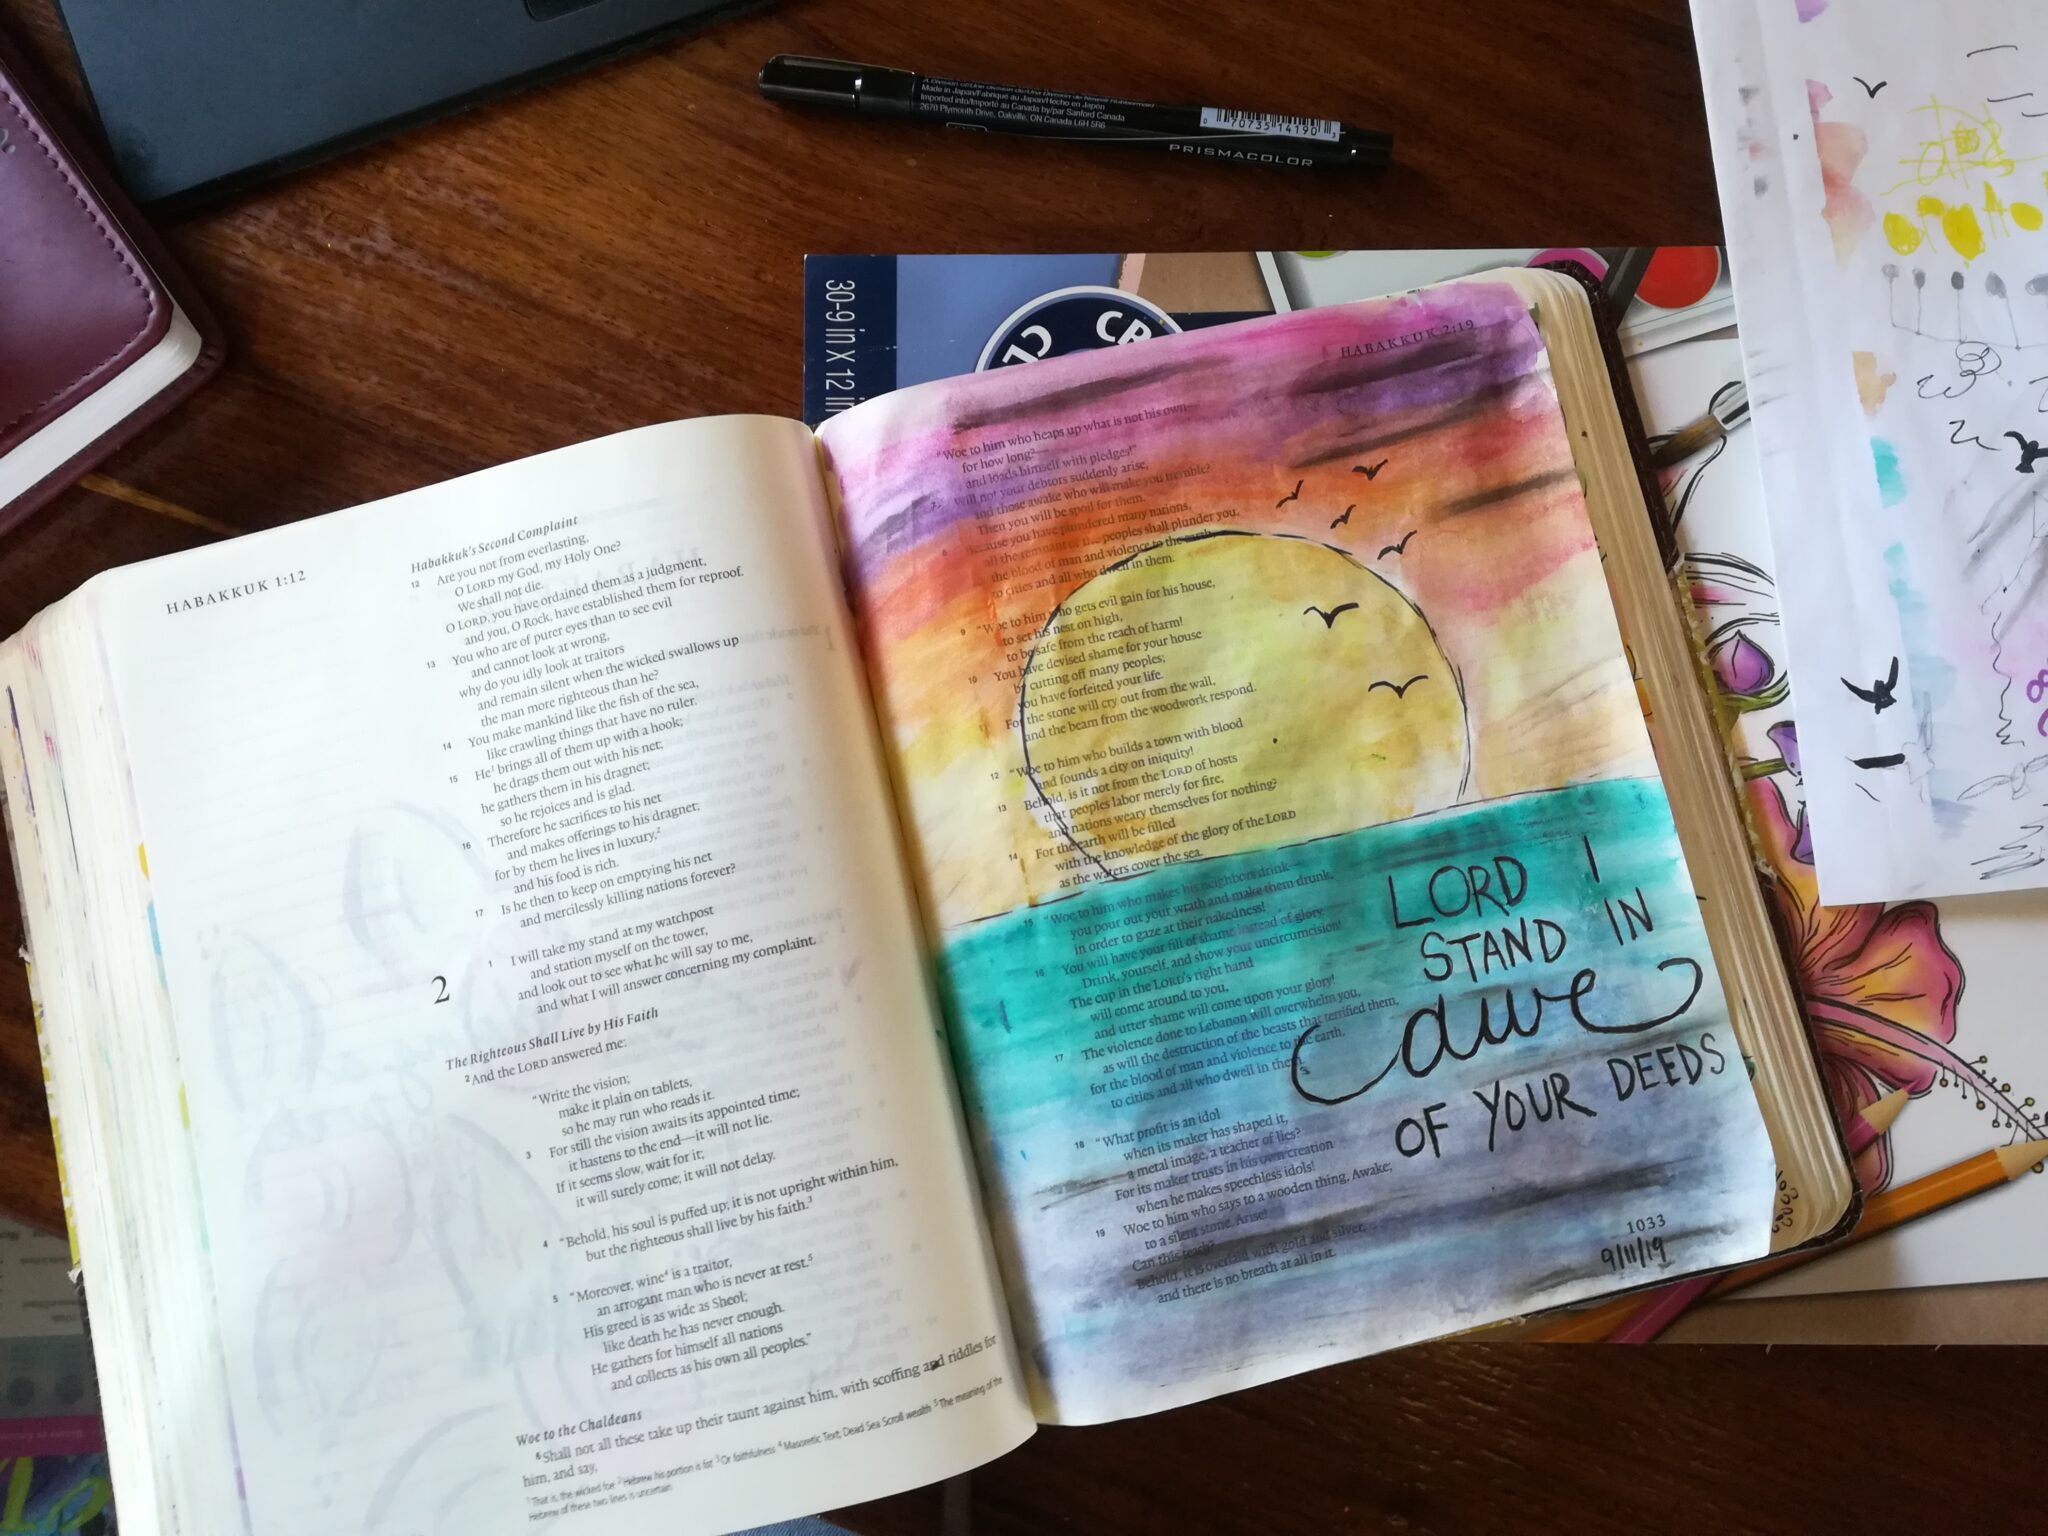 My Soul Finds Rest through Art: How an Unconventional Sabbath Practice Helps Me Connect with God